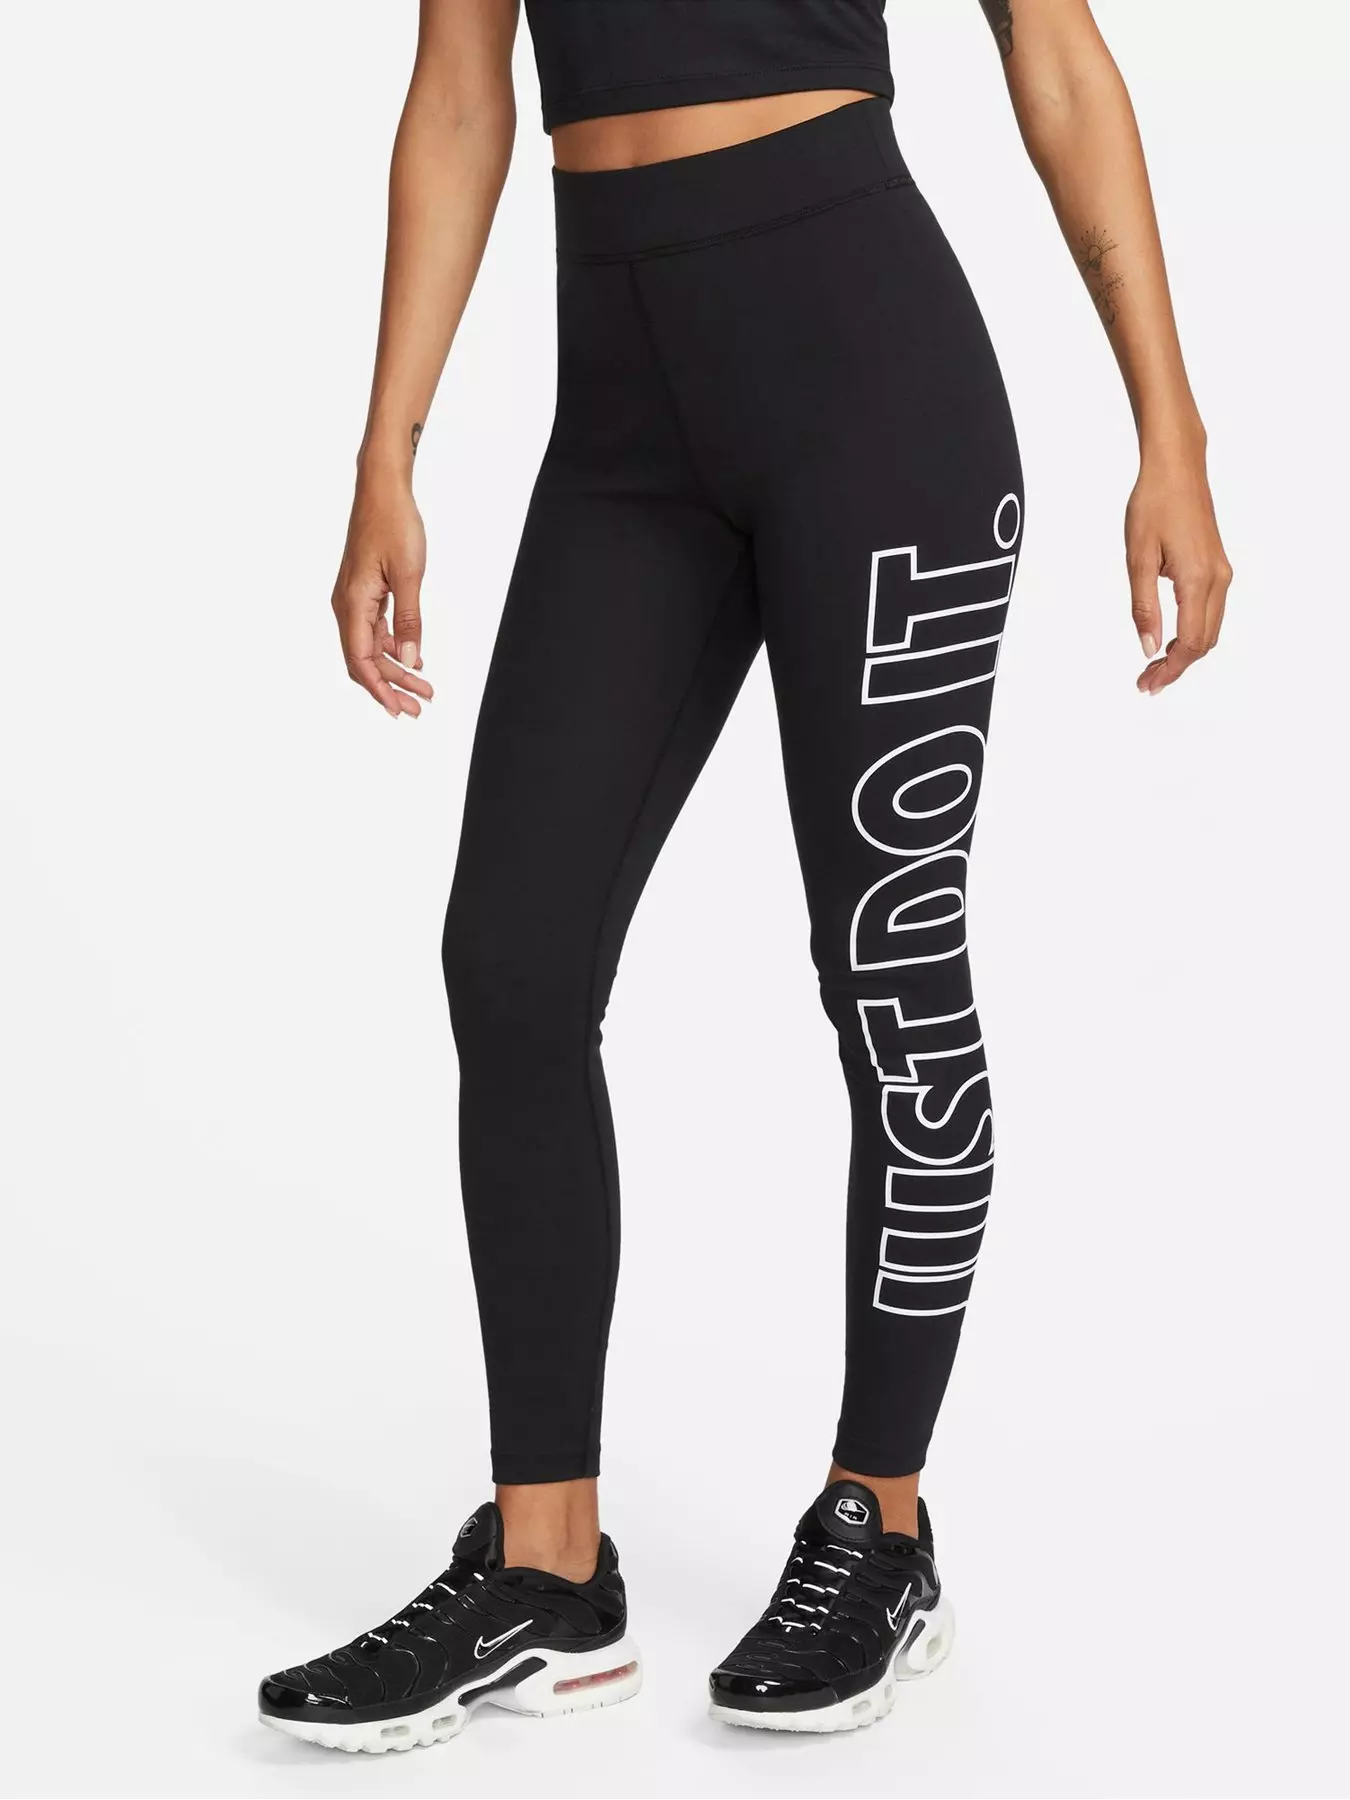 Nike, Pants & Jumpsuits, Nike Power Victory Tight Fit High Rise Leggings  Black White Hyper Pink Small